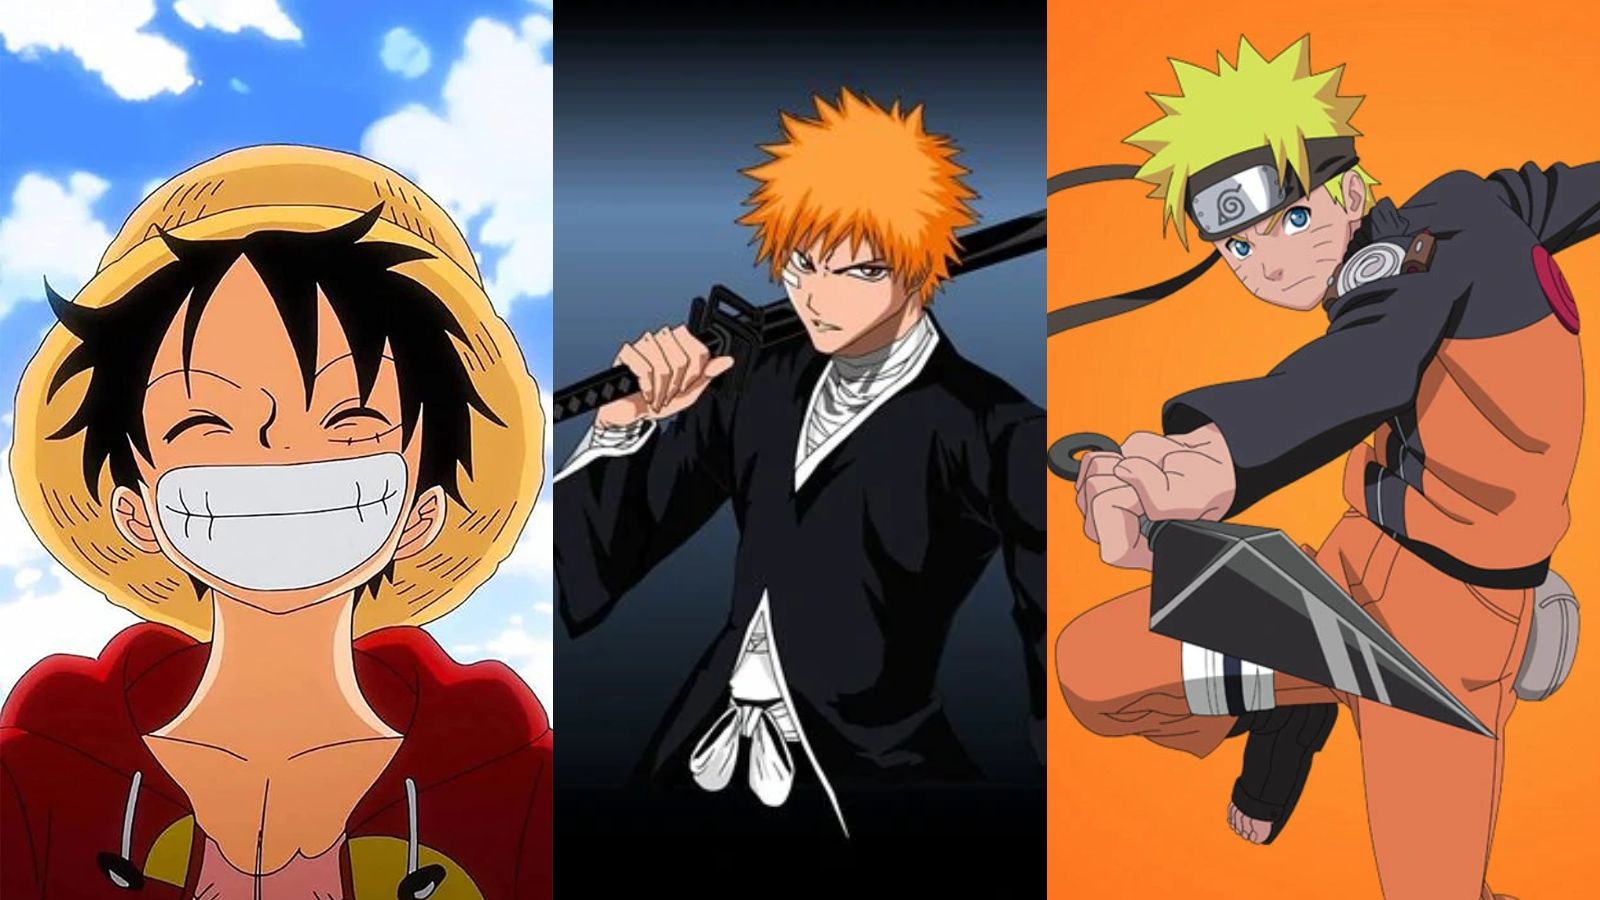 10 Anime TV Shows to Watch if You Love One Piece